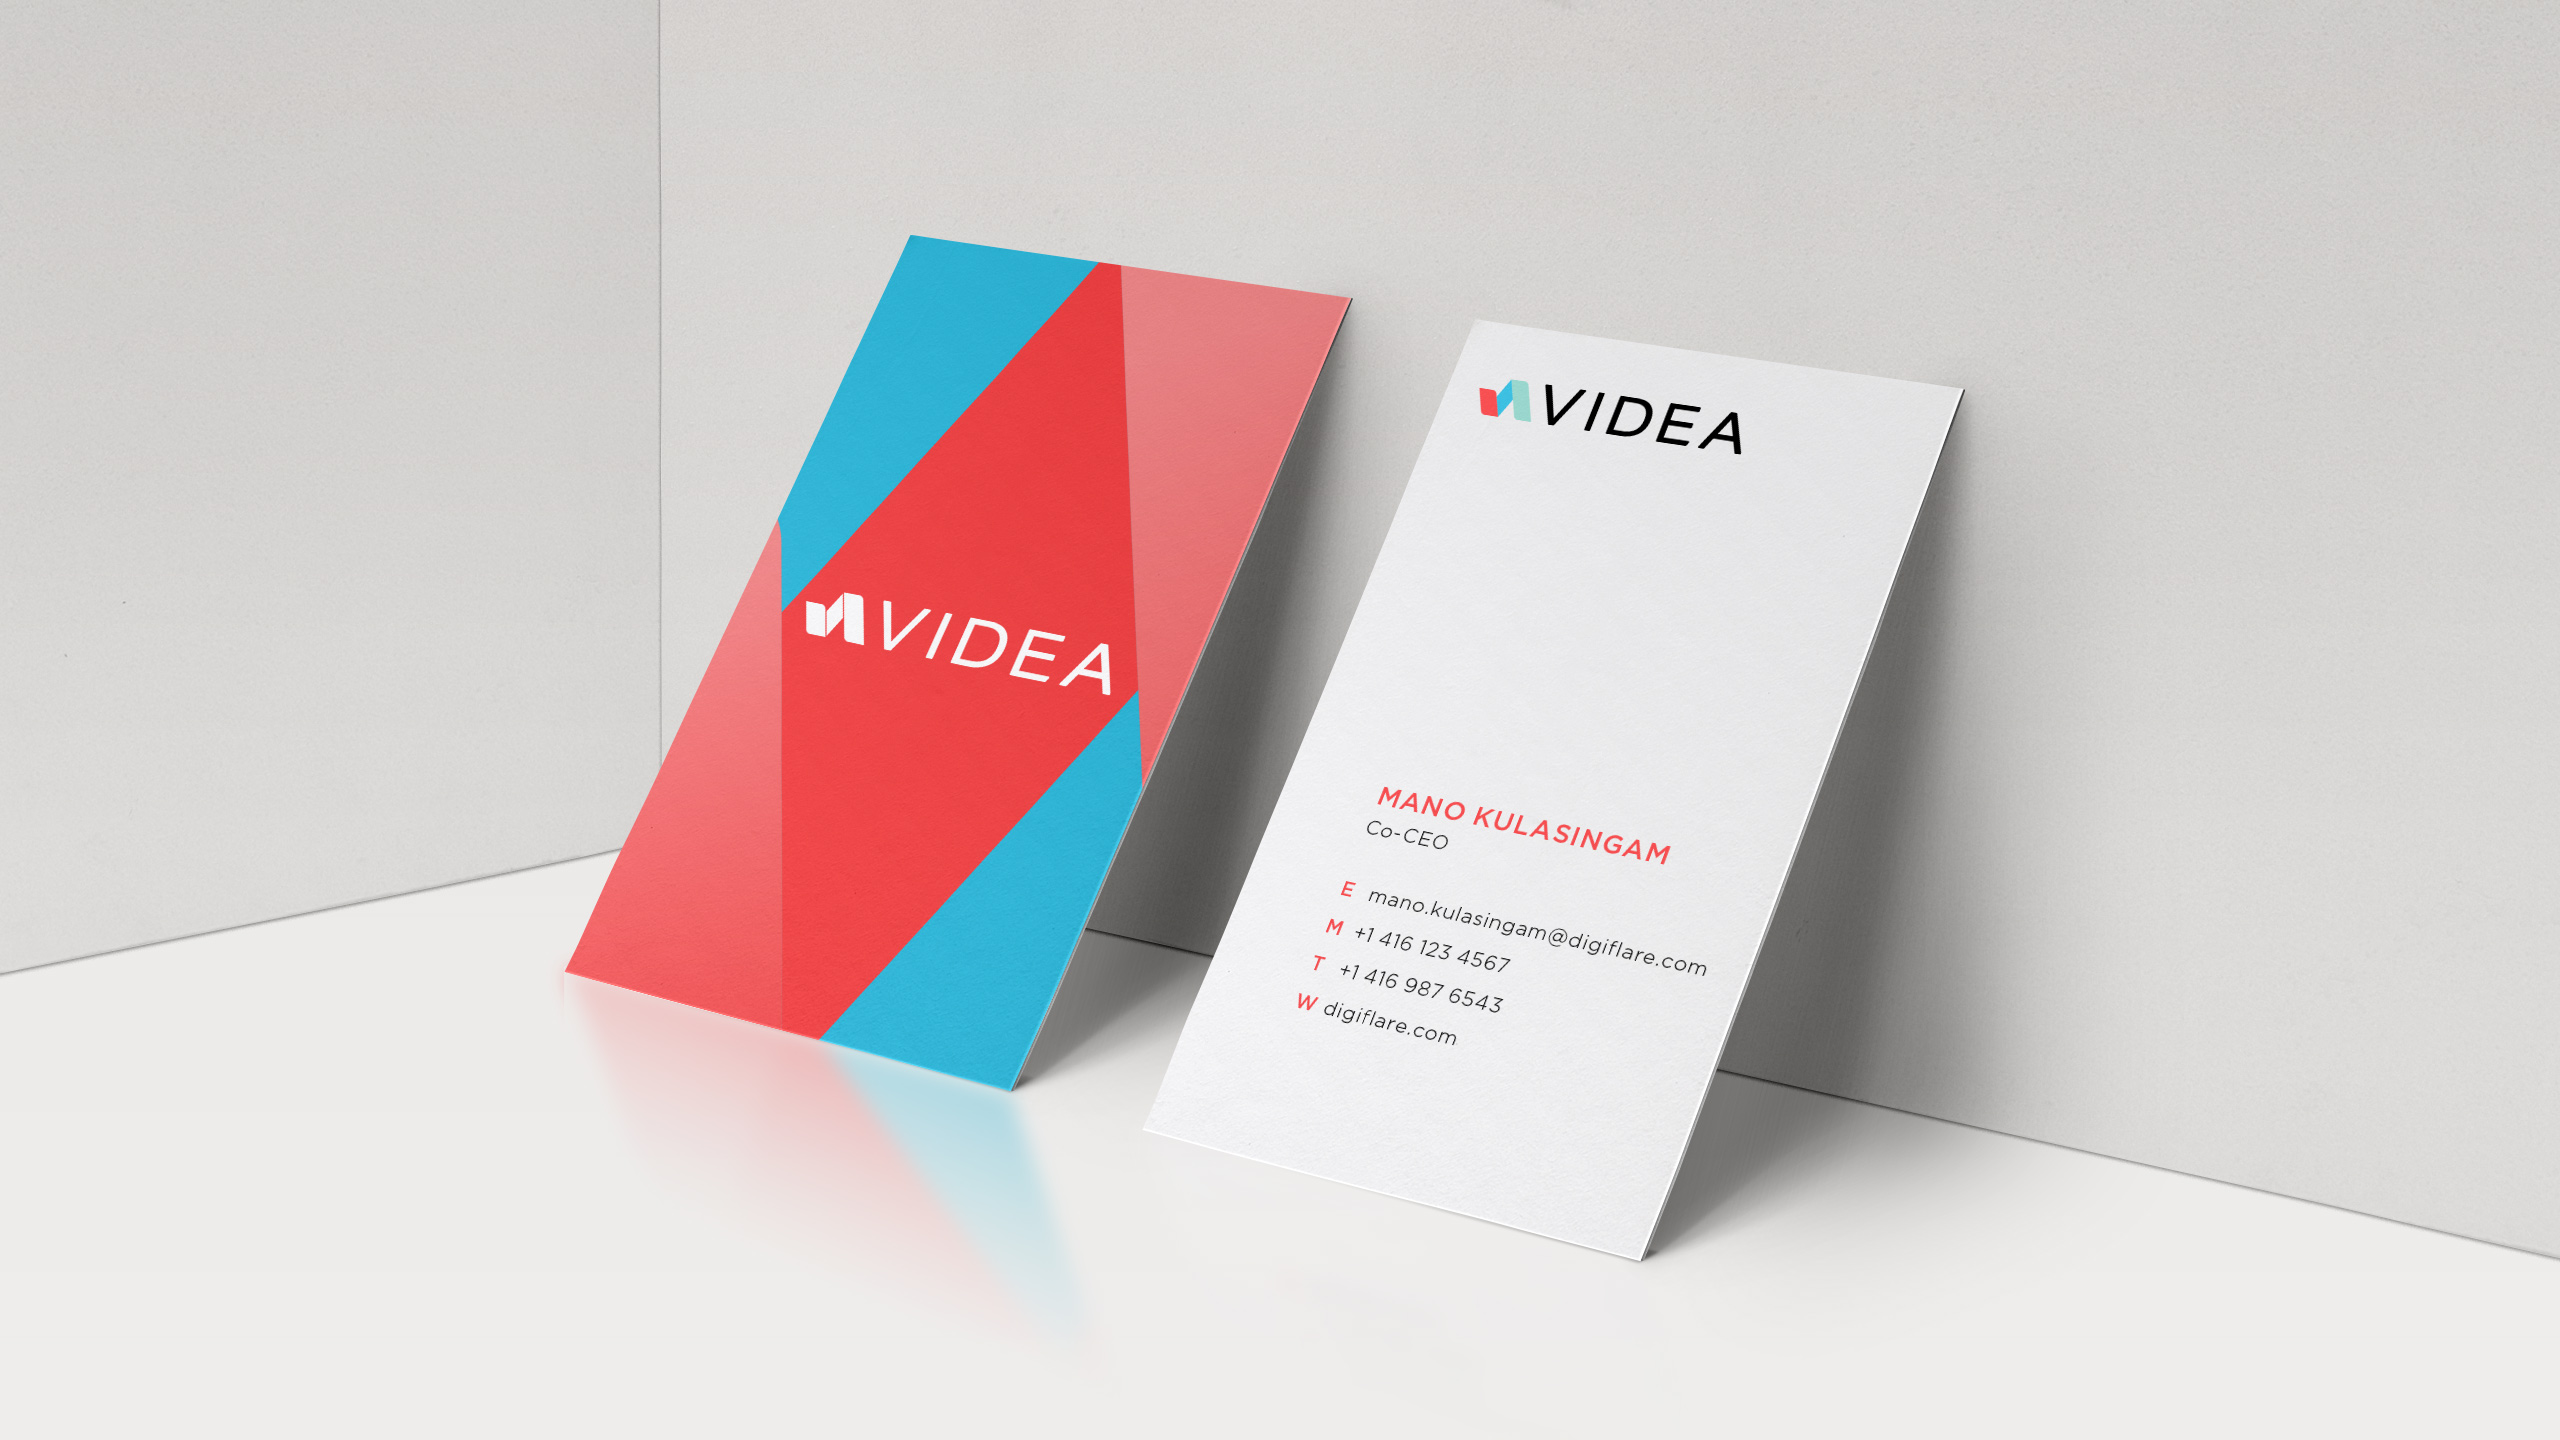 Business Card design for Videa by The Coopers